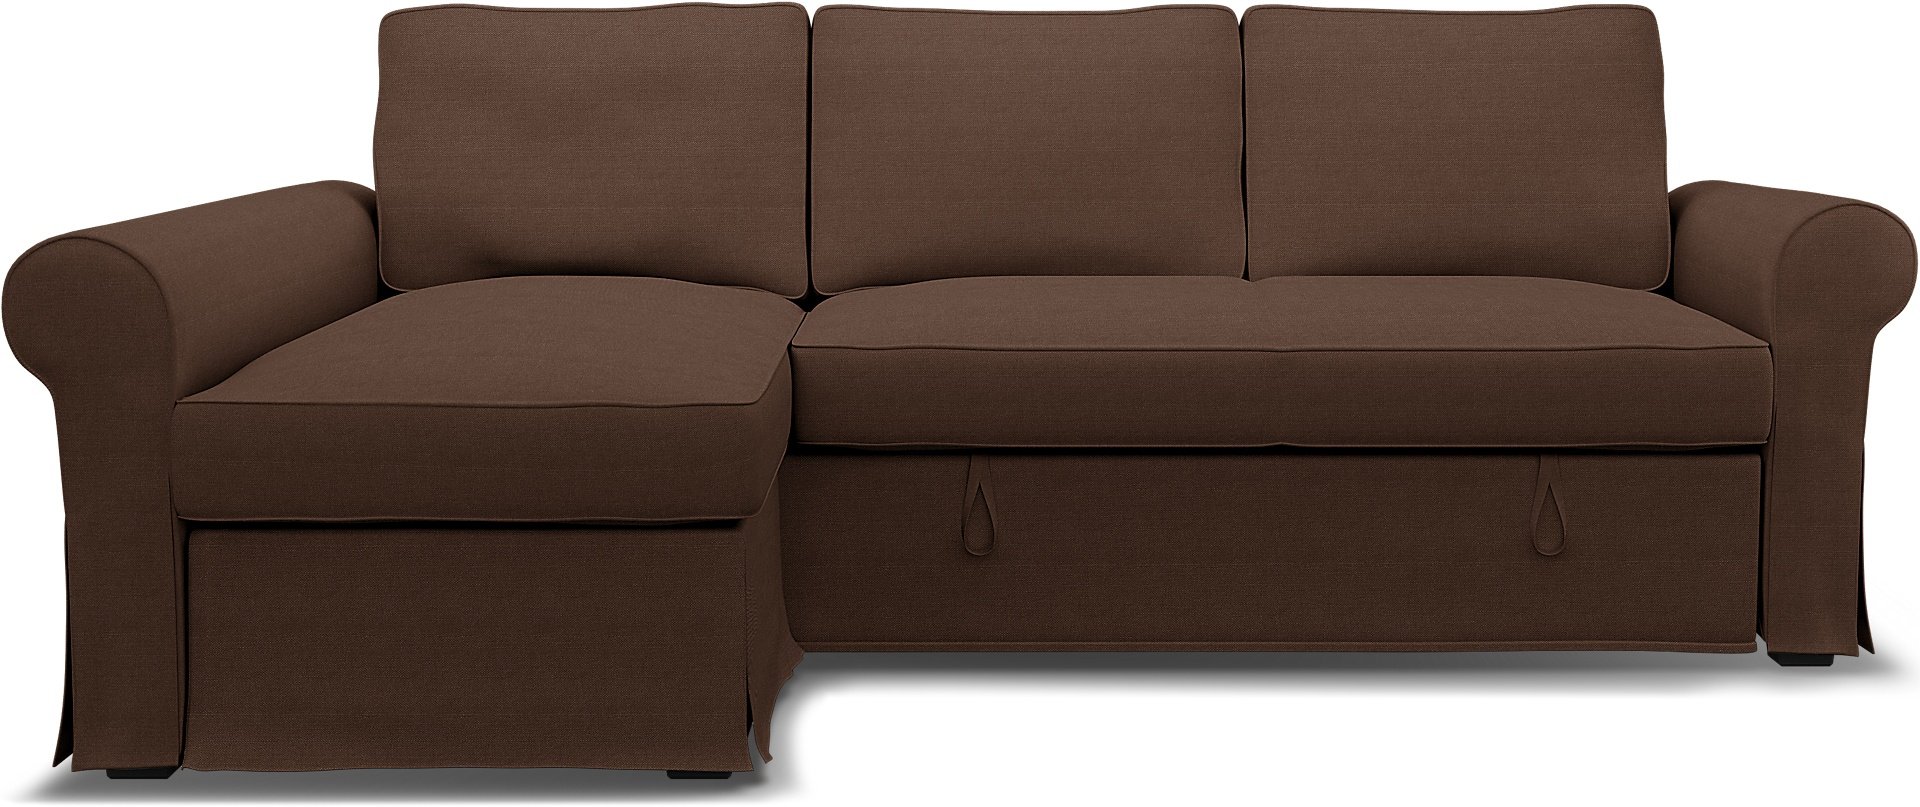 IKEA - Backabro Sofabed with Chaise Cover, Chocolate, Linen - Bemz